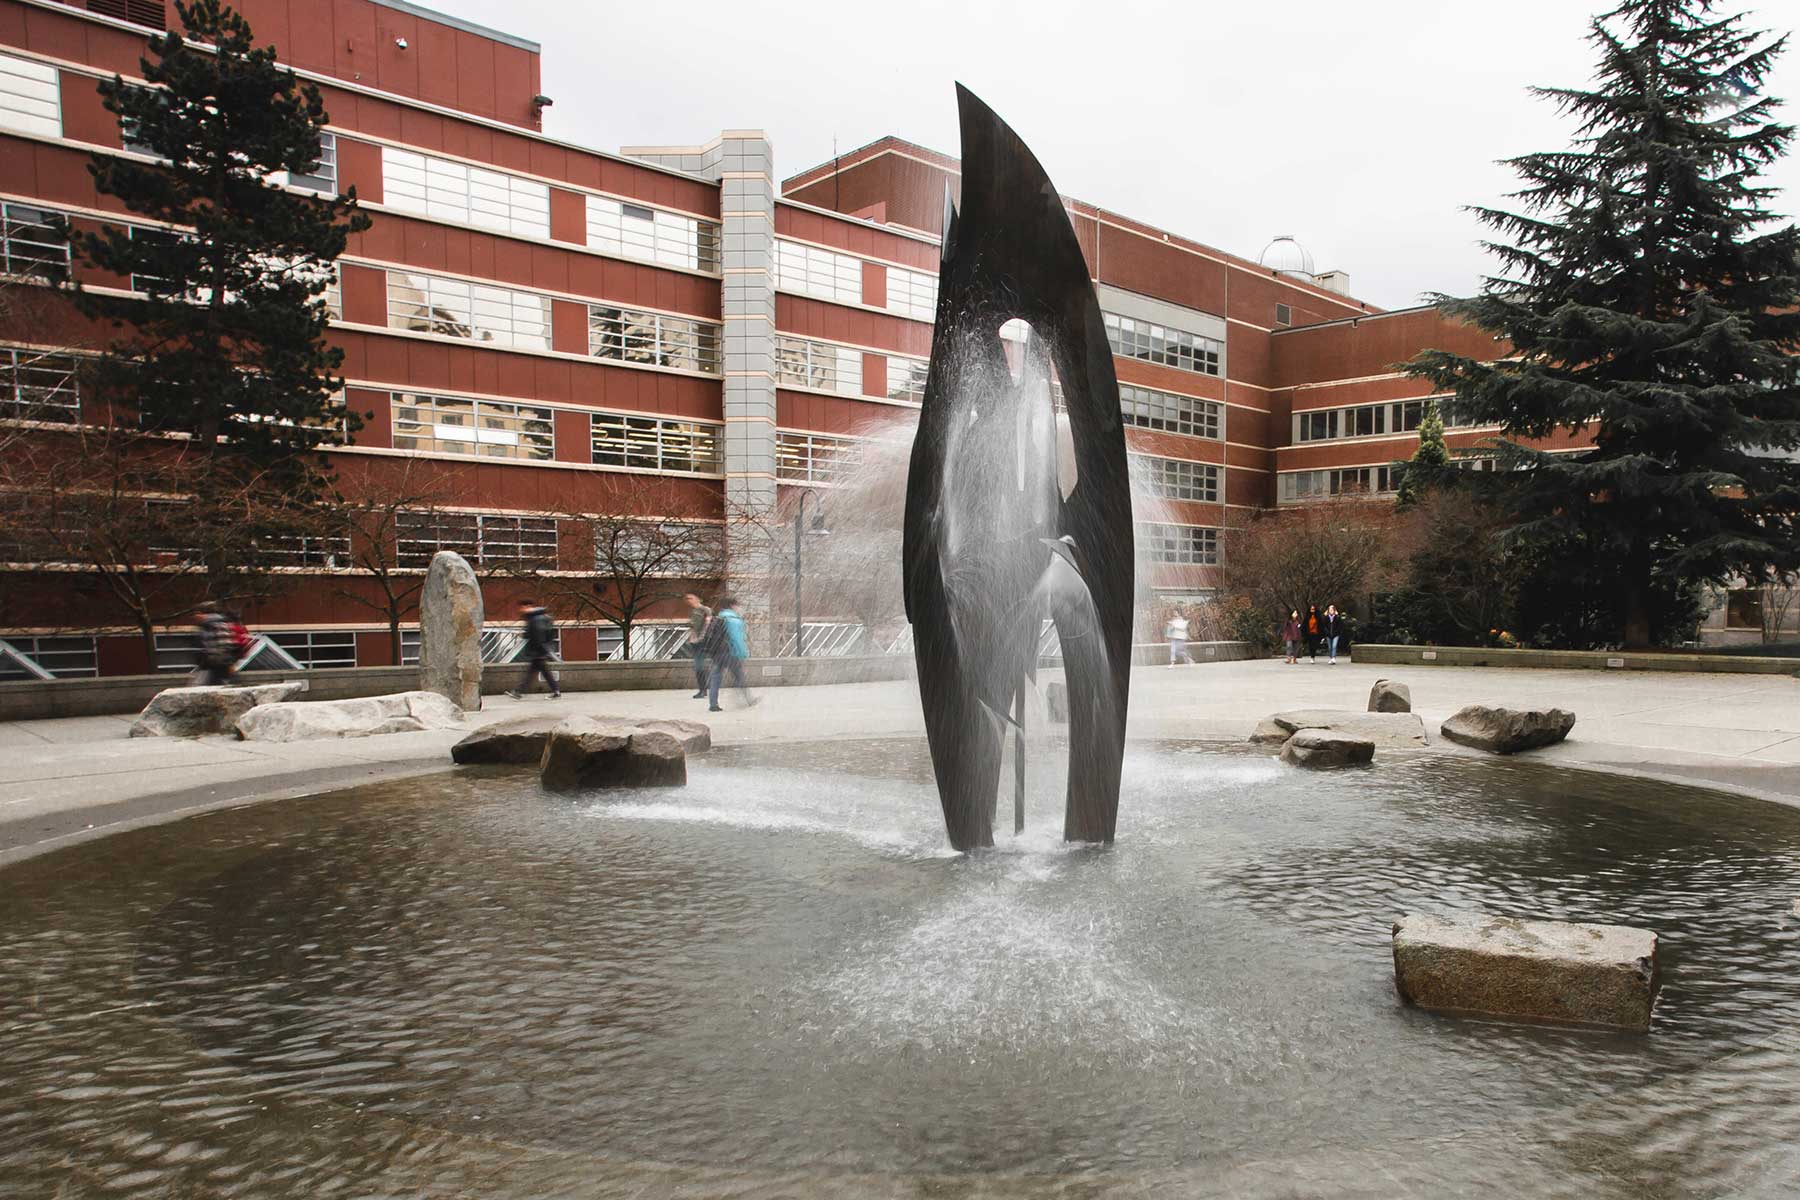 SU Fountain with Bannan and Engineering Buildings in the background